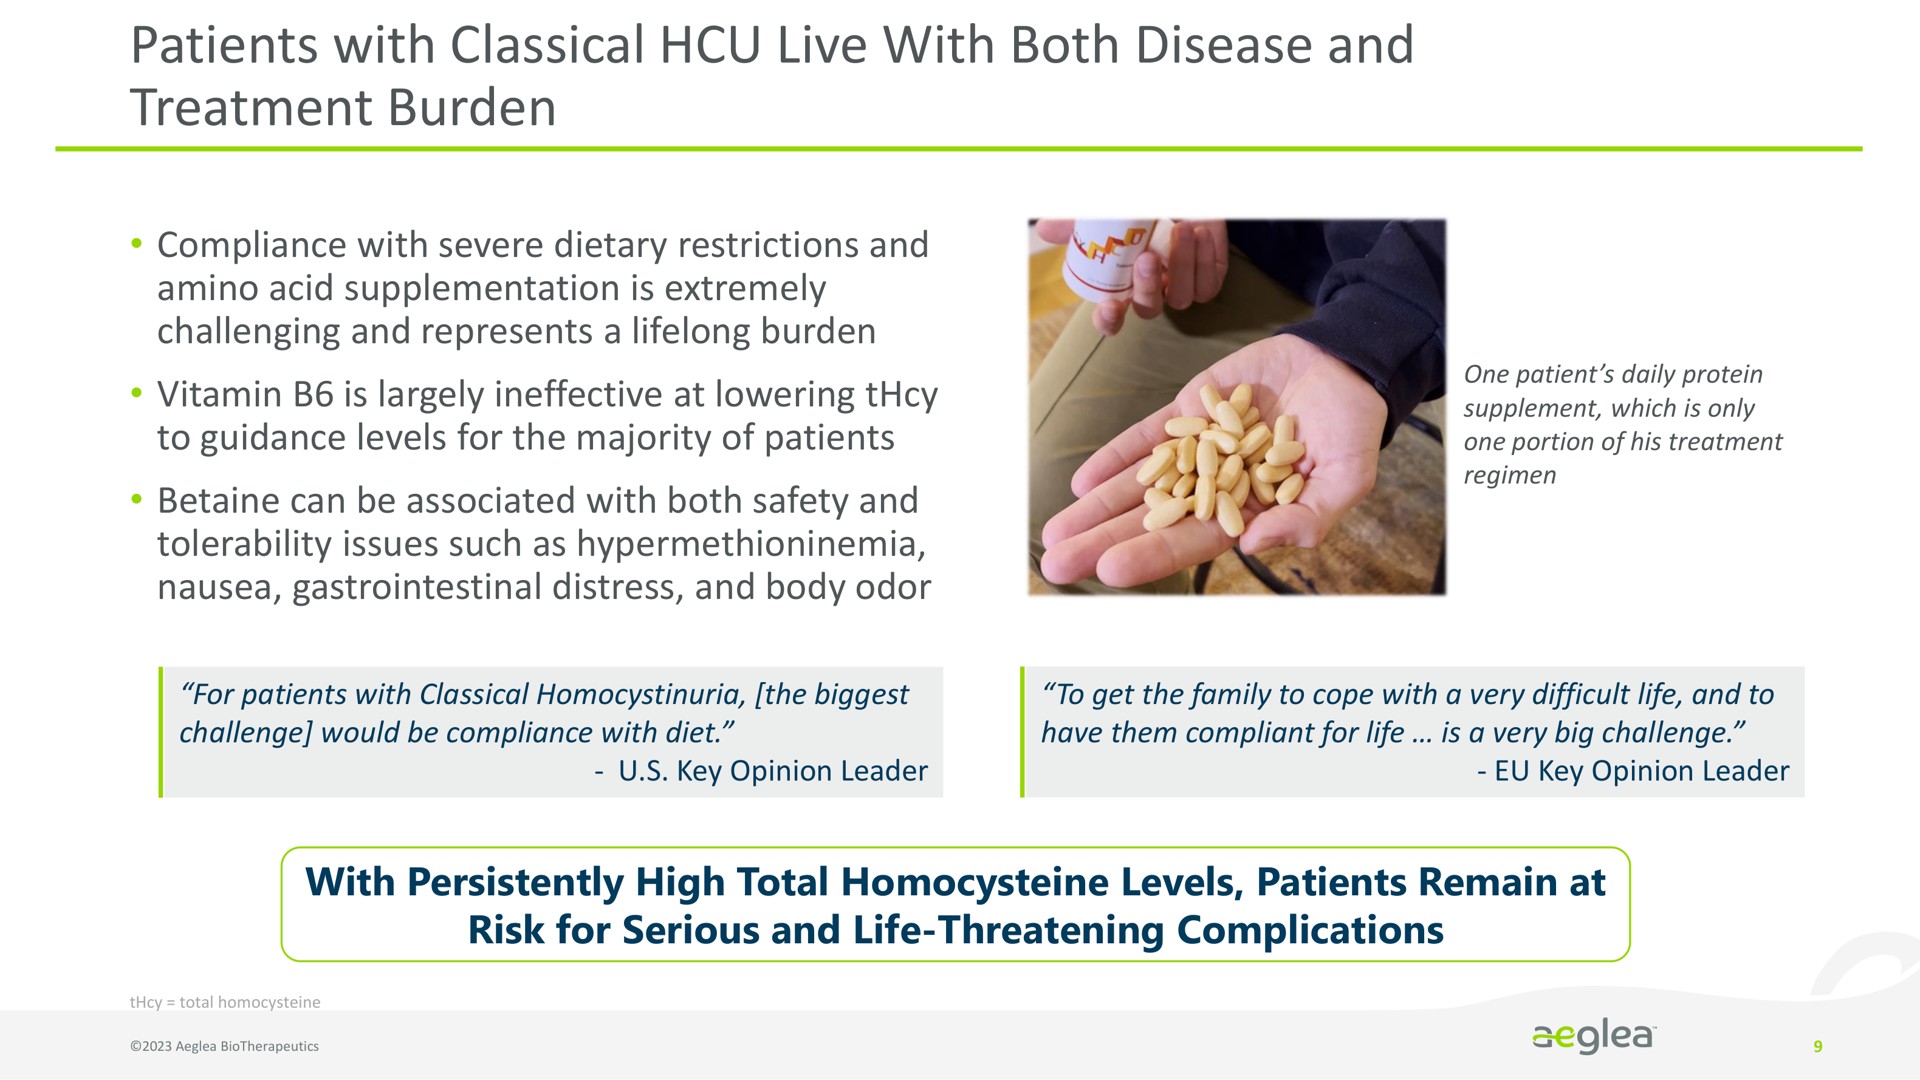 patients with classical live with both disease and treatment burden | Aeglea BioTherapeutics